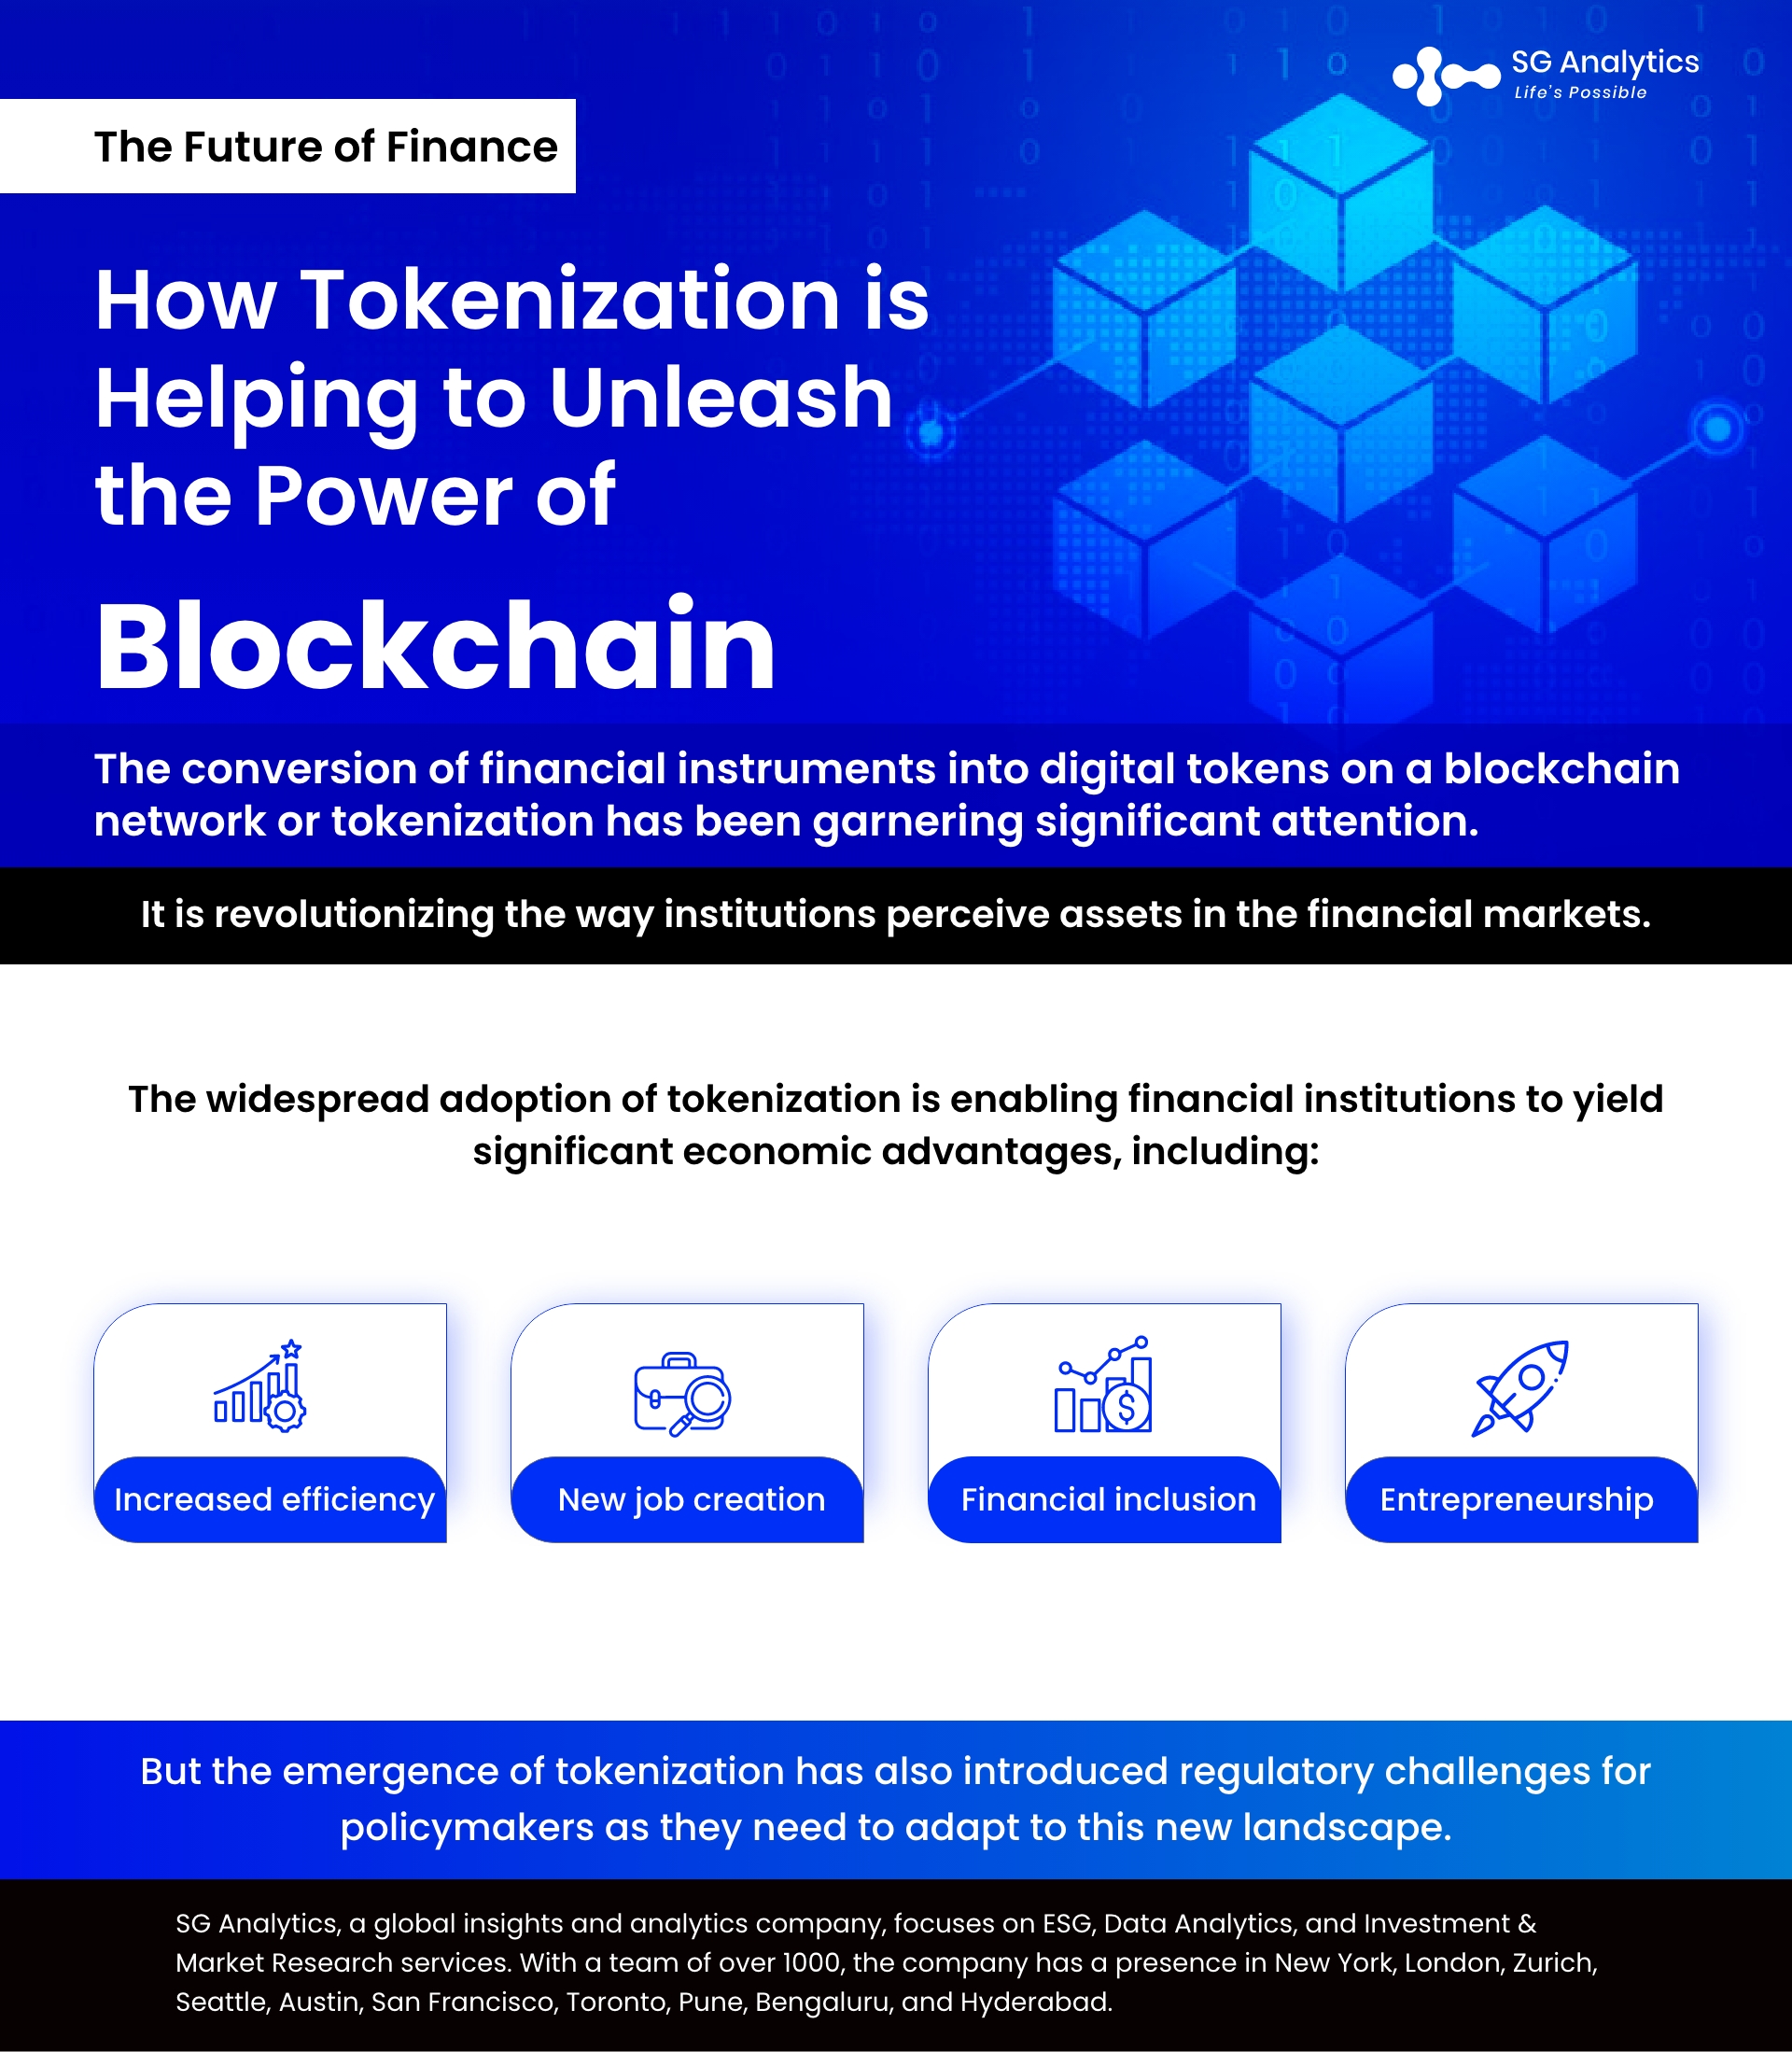 How Tokenization is Helping to Unleash the Power of Blockchain